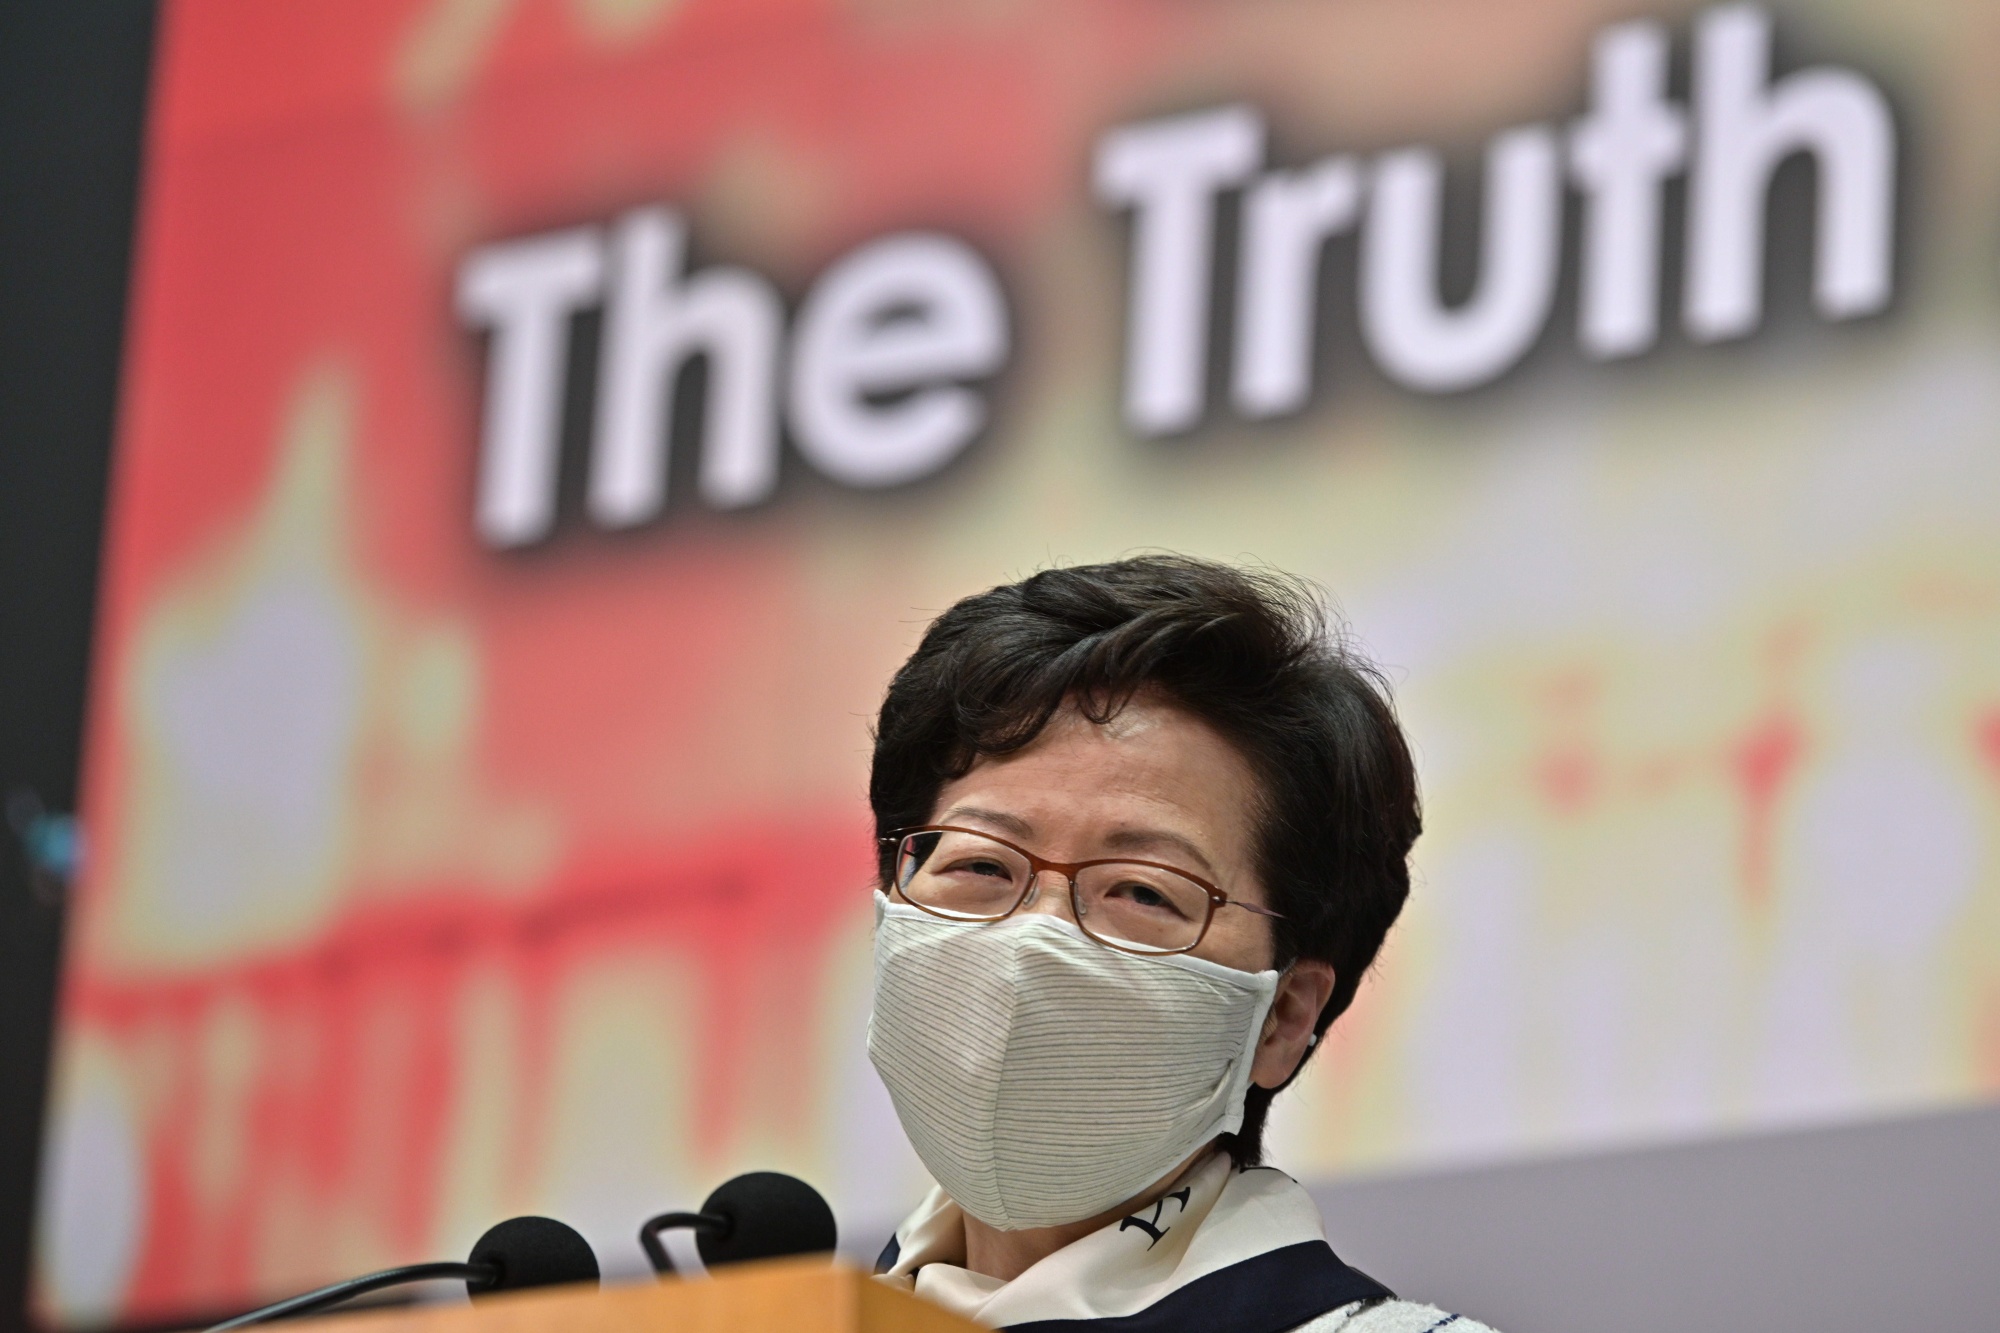 Carrie Lam has gone from calling opponents “spoiled children” to “enemies of the people.”